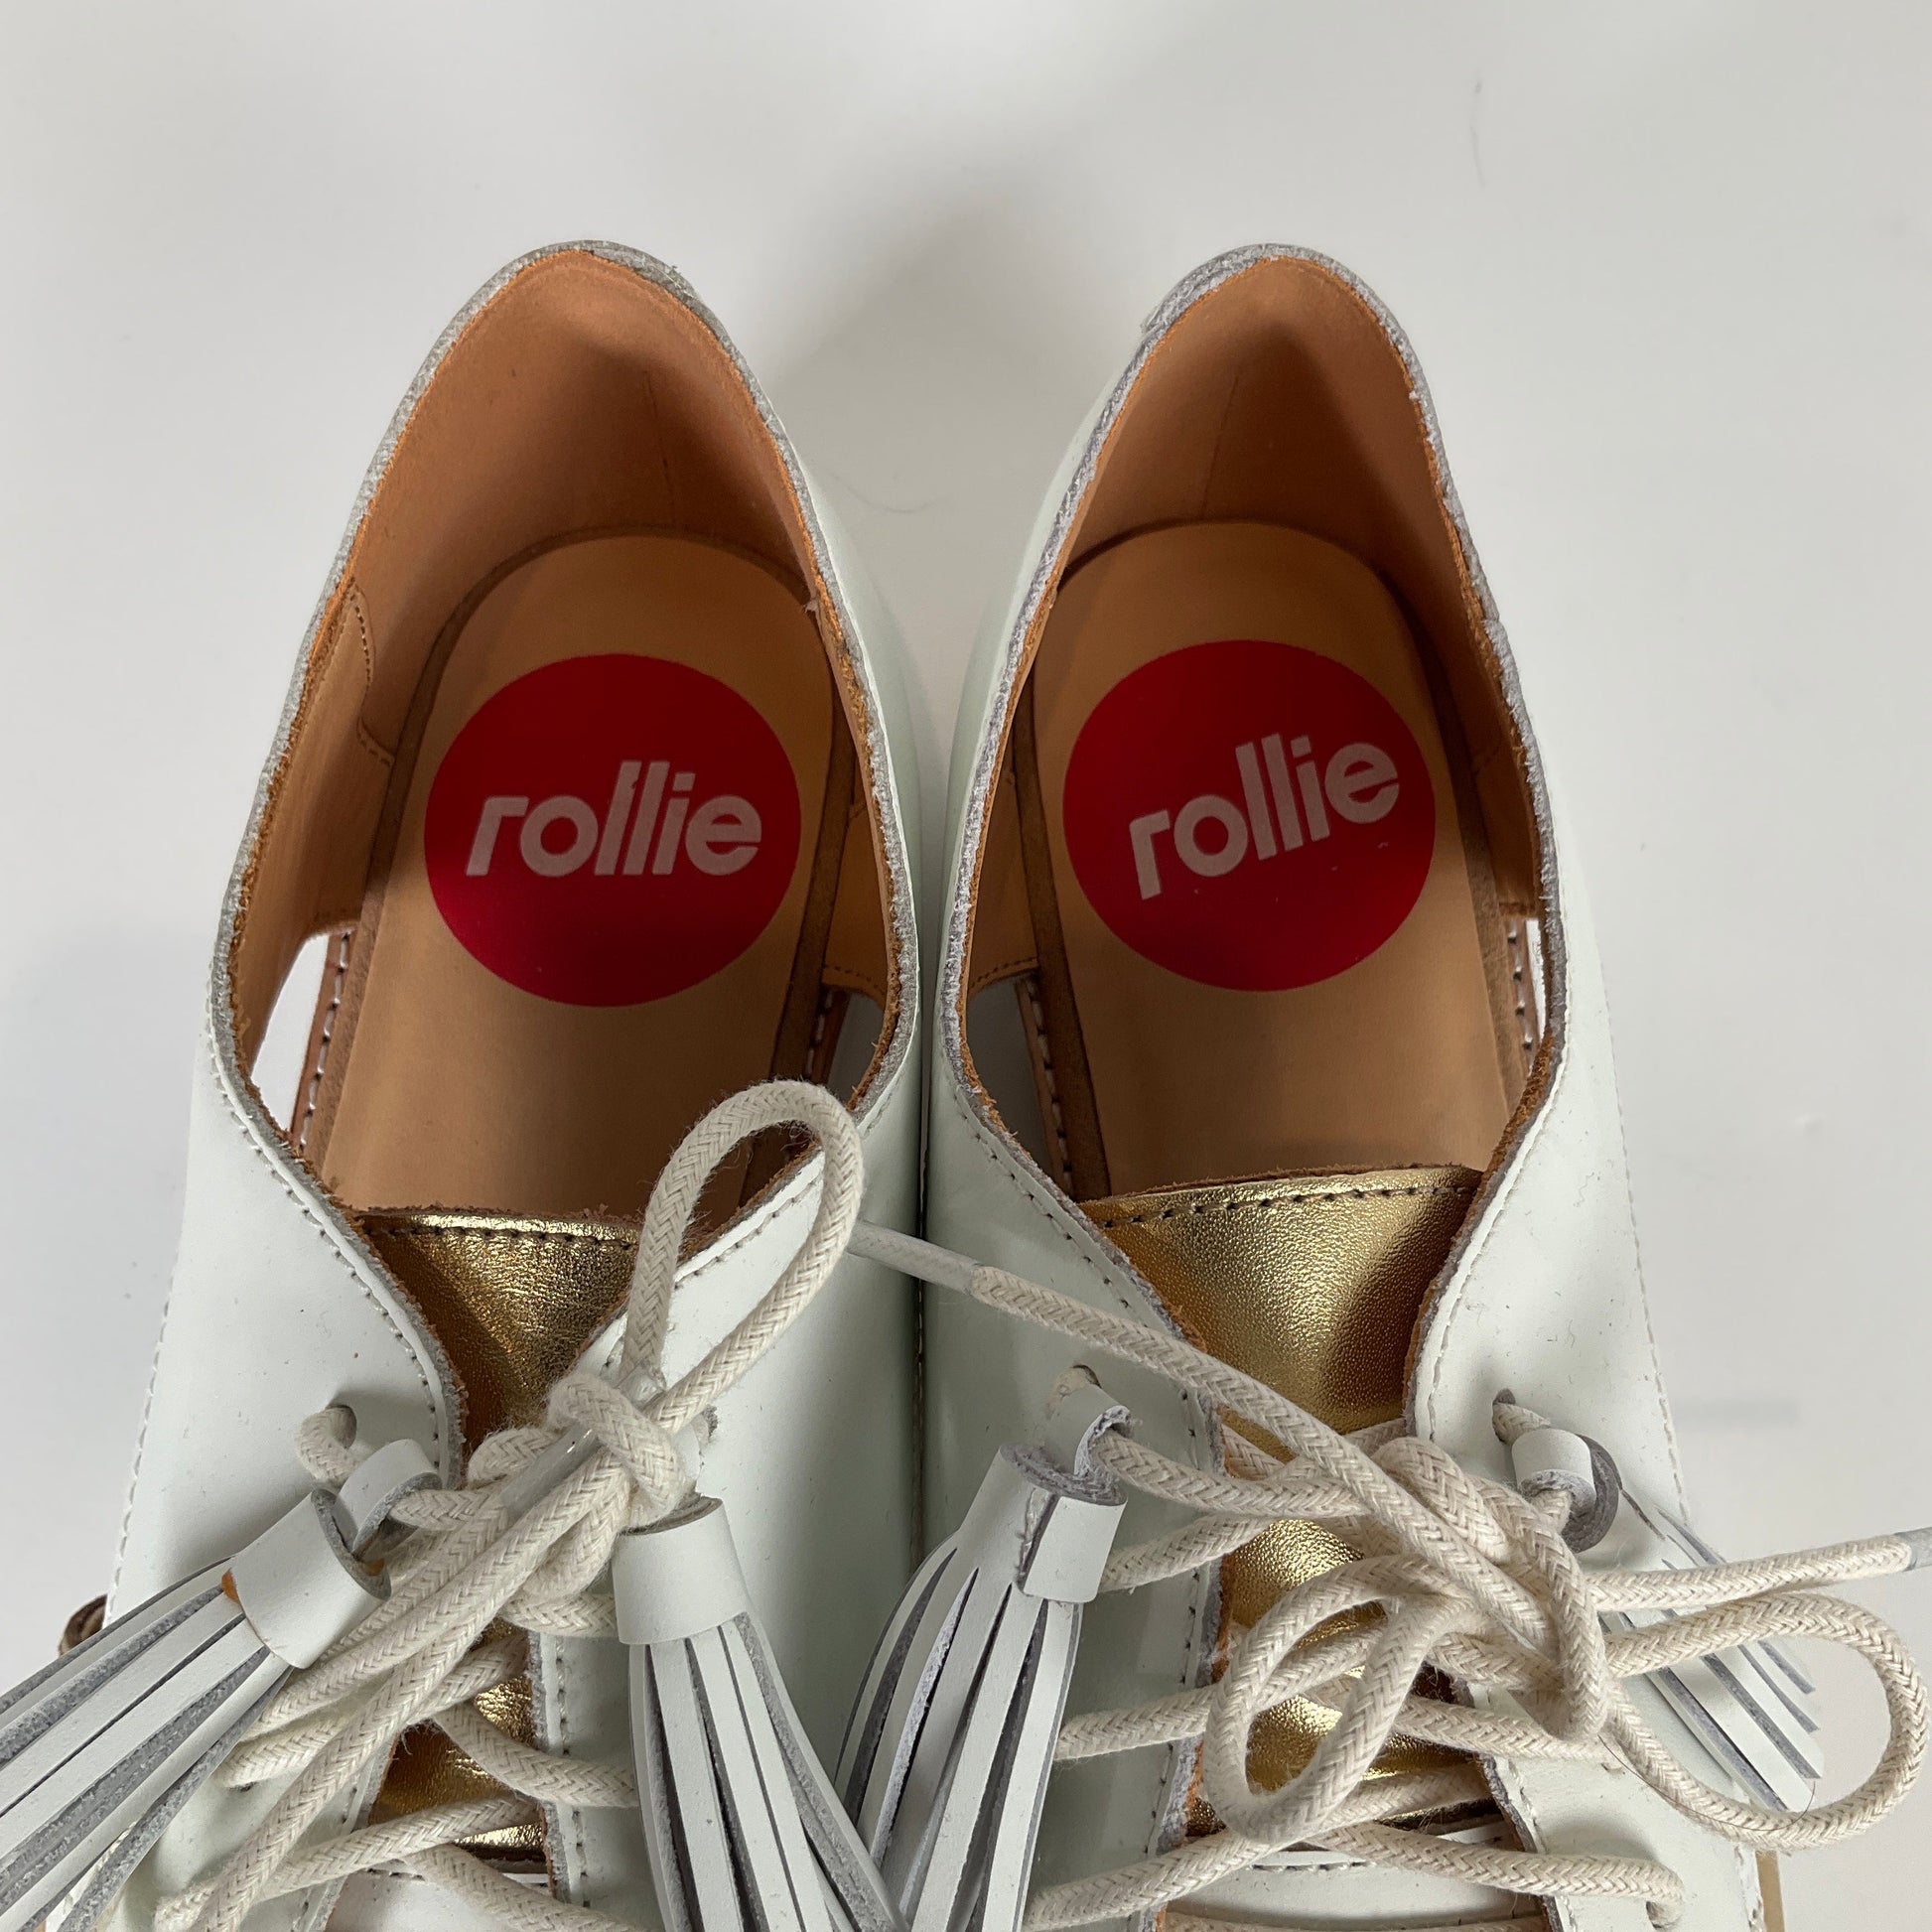 Rollie - Sidecuts A Kilt And Tassles! Size 37 Shoes